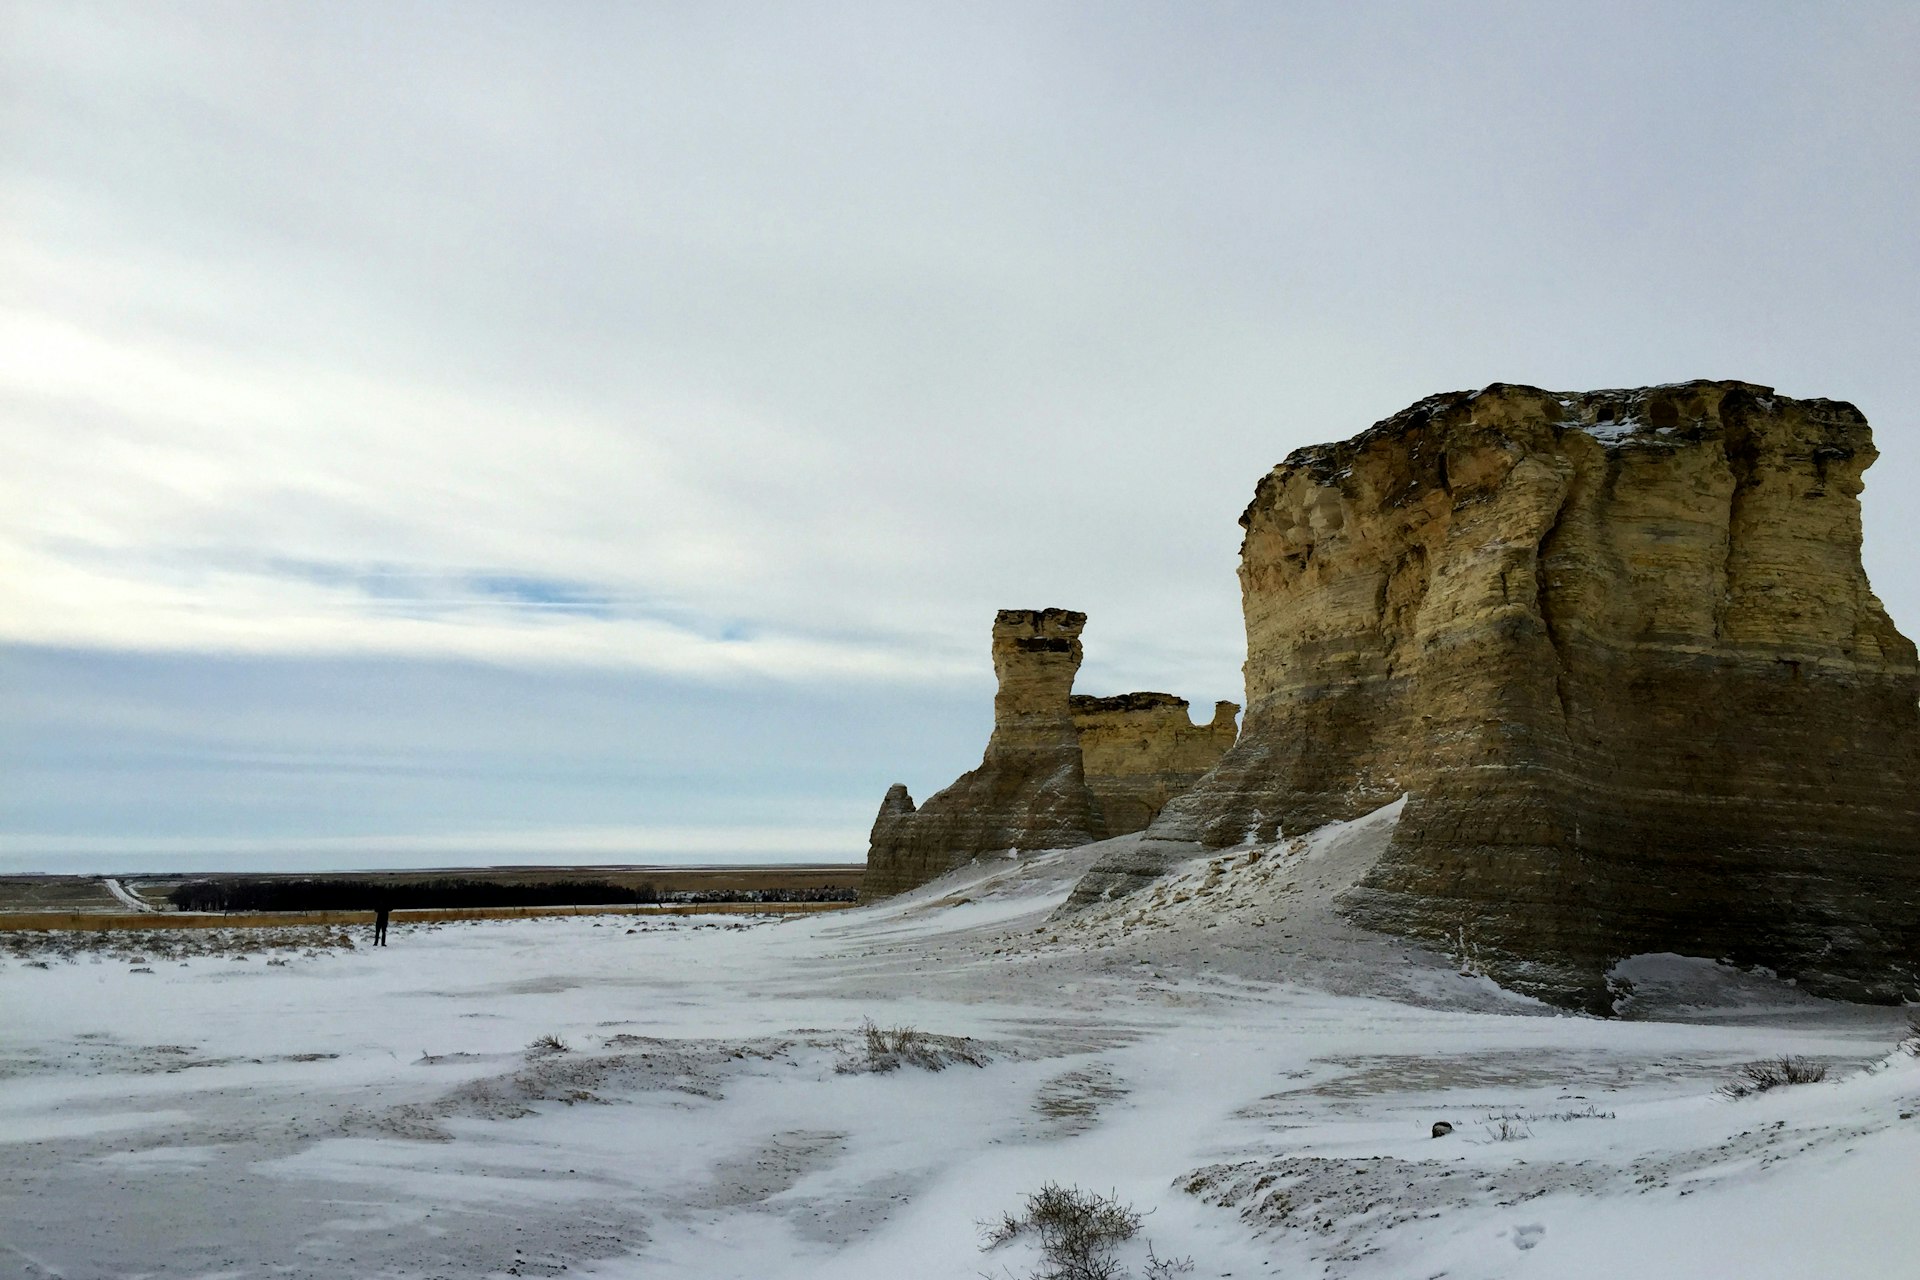 Chalk formations at Monuments Rock in western Kansas, along Interstate 70